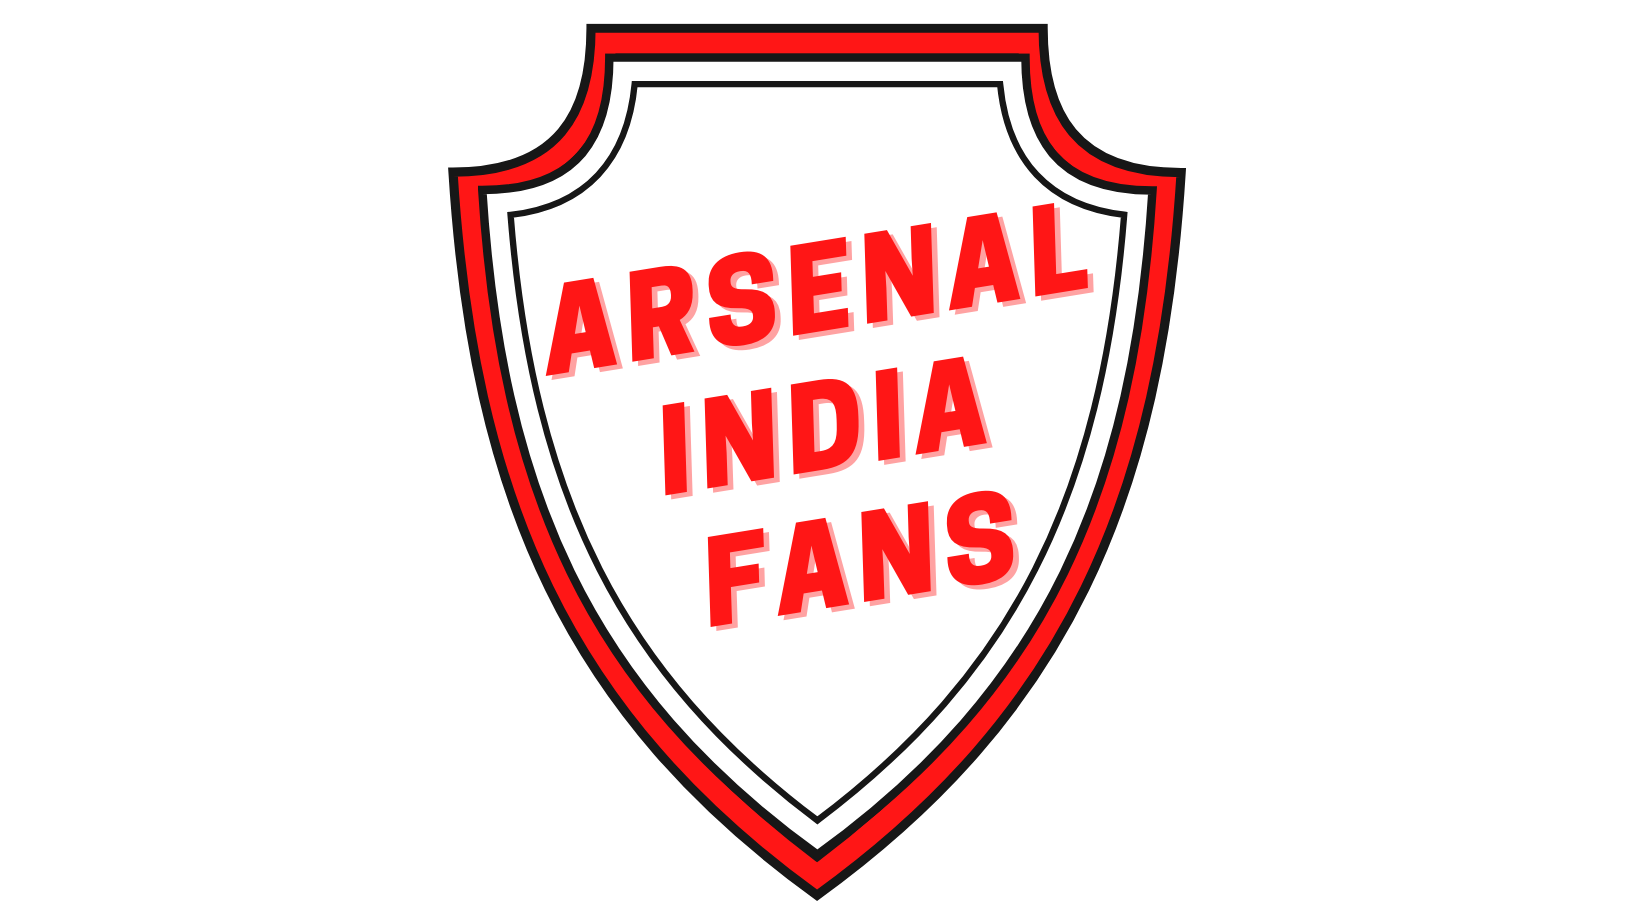 Arsenal India Fans